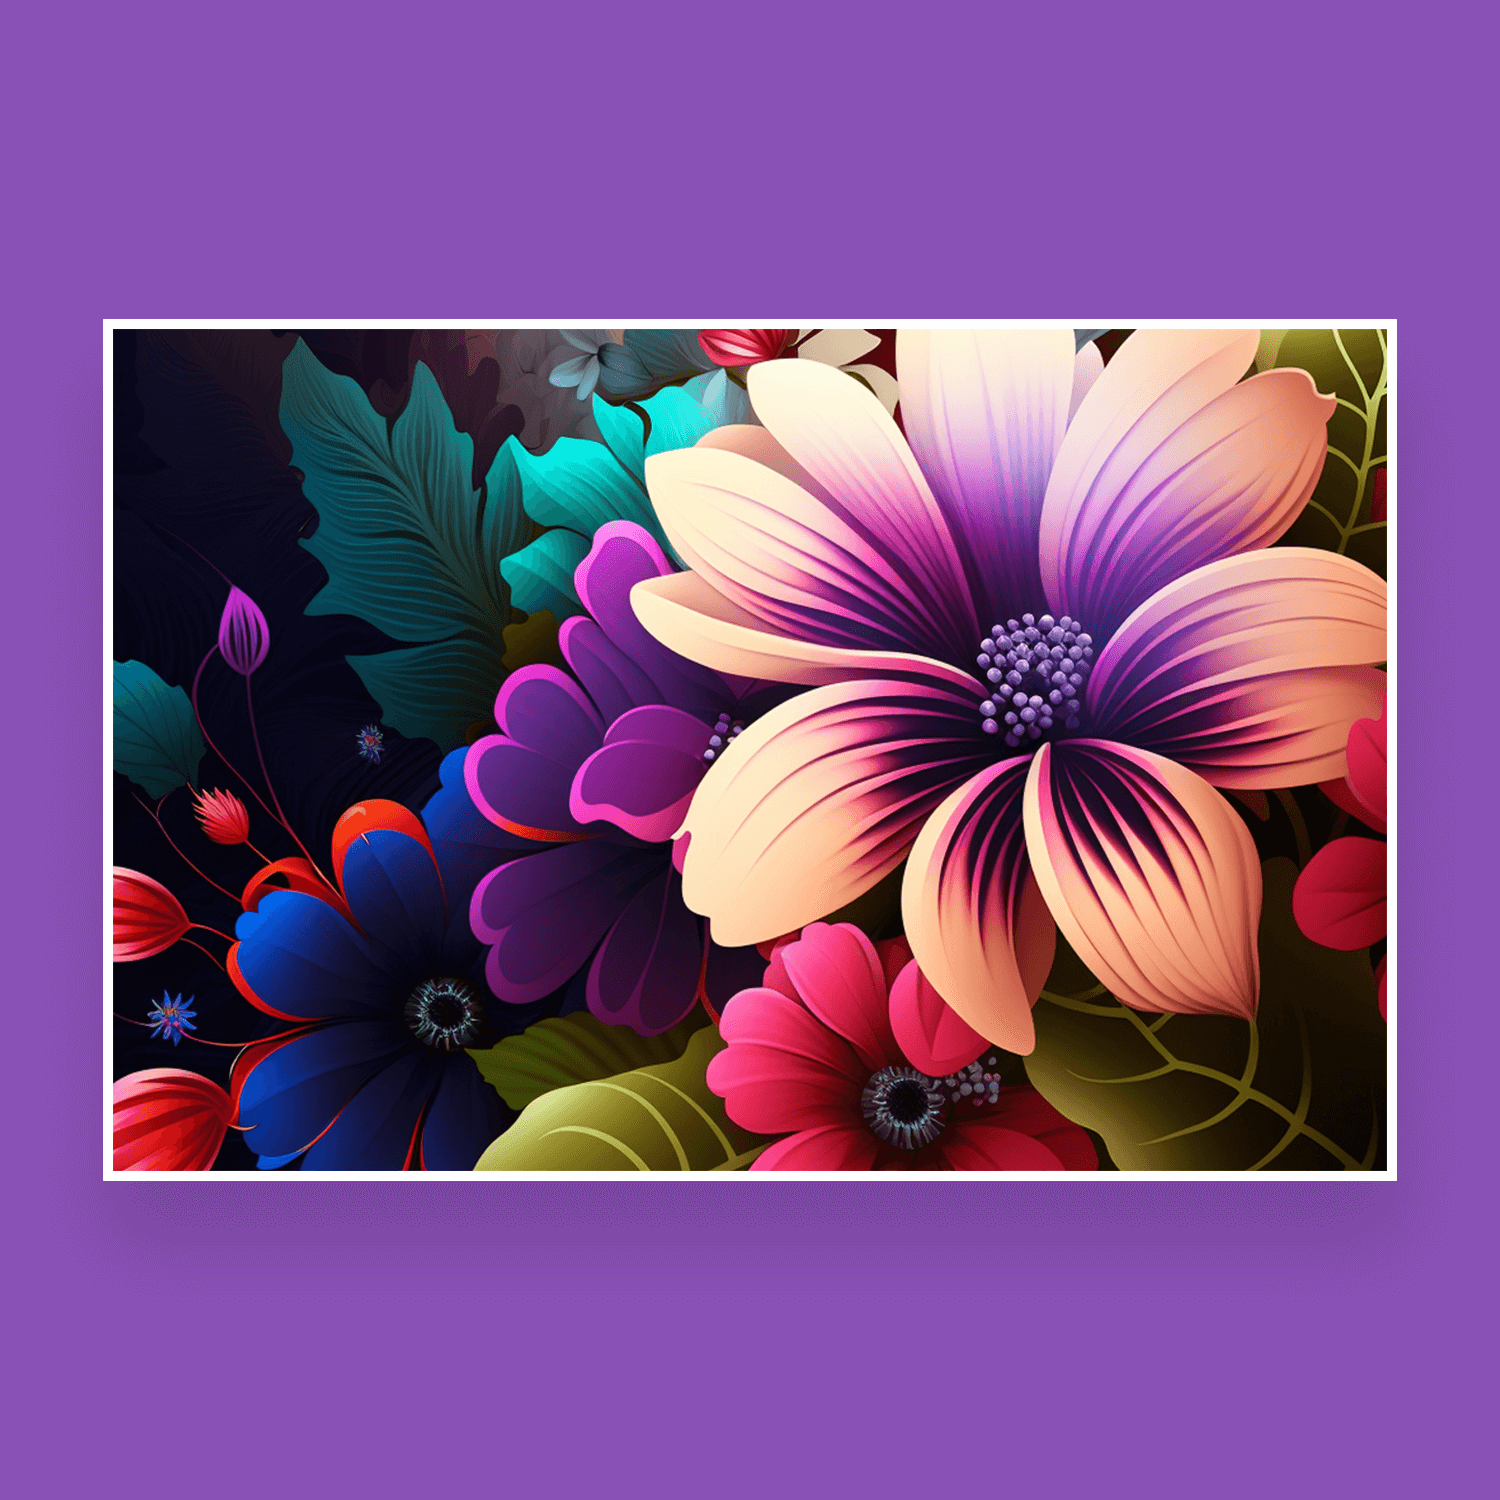 Summer Flowers Background cover image.